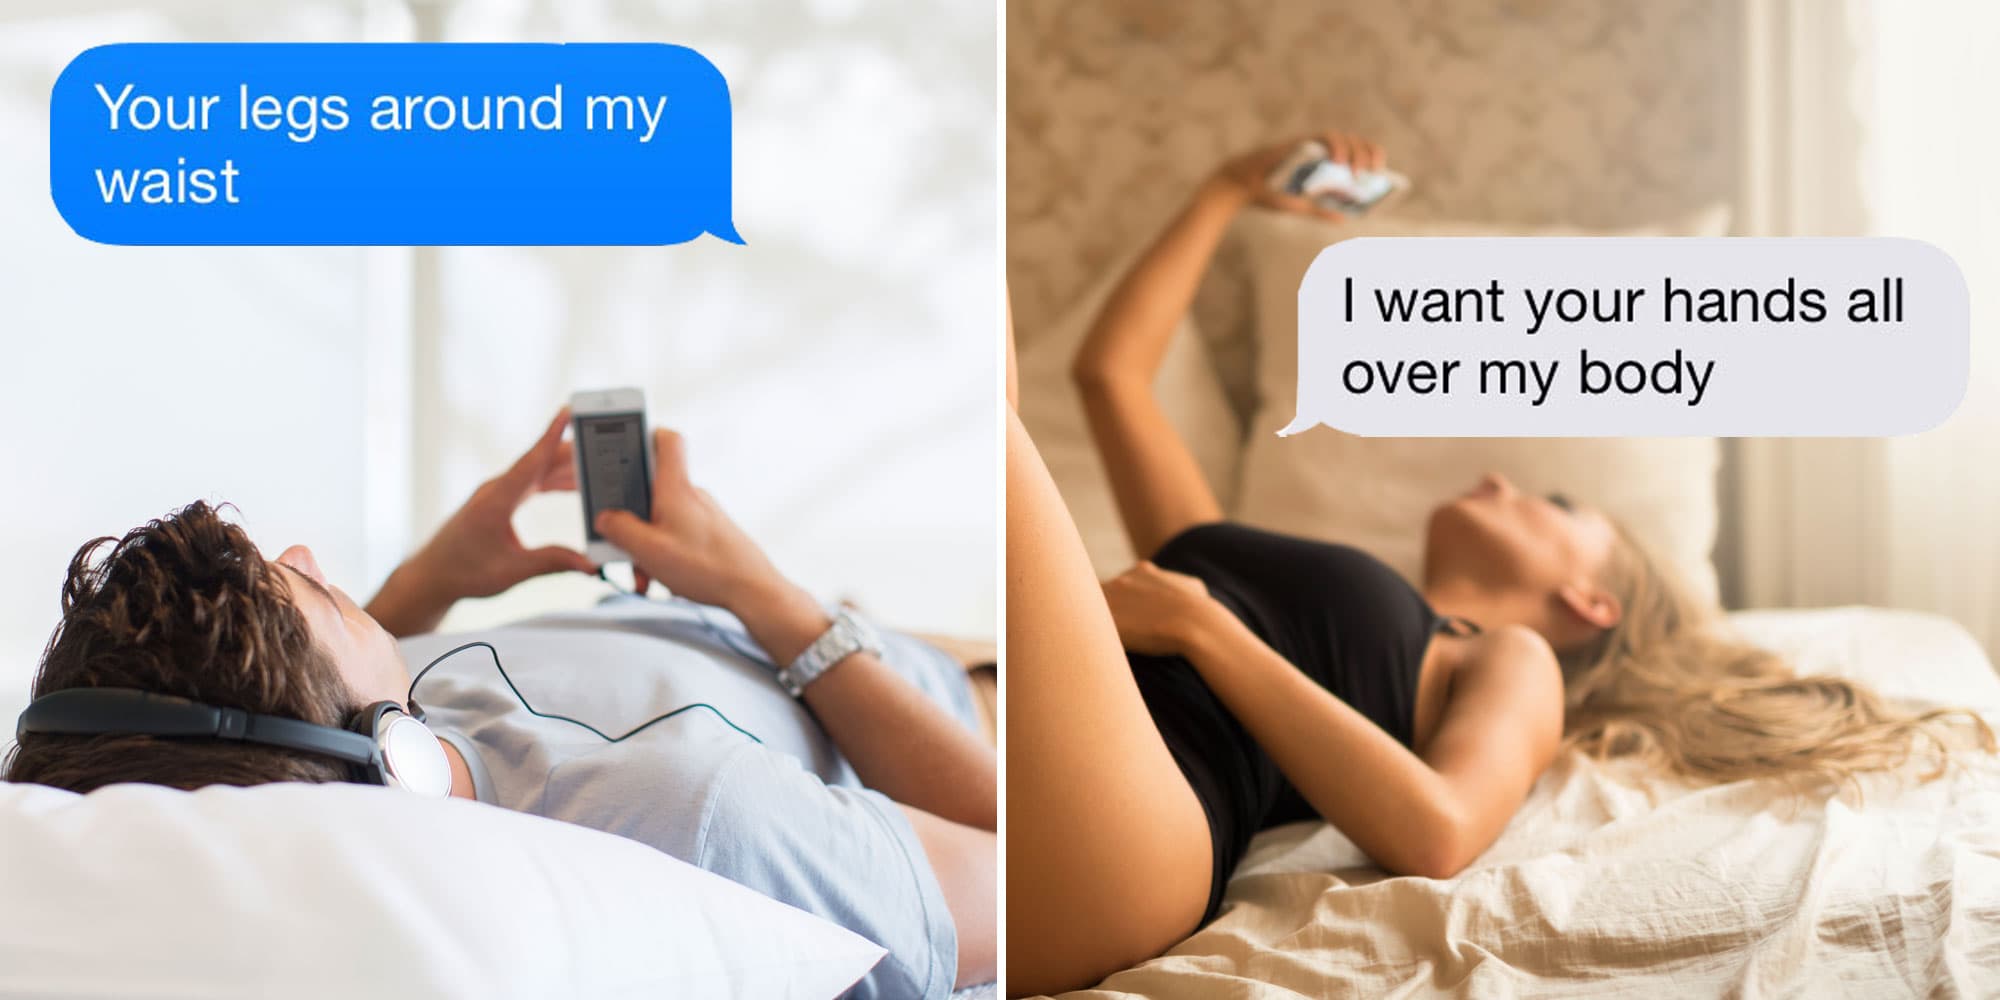 How To Encourage Your Partner To Sext More - Adulthookup.com